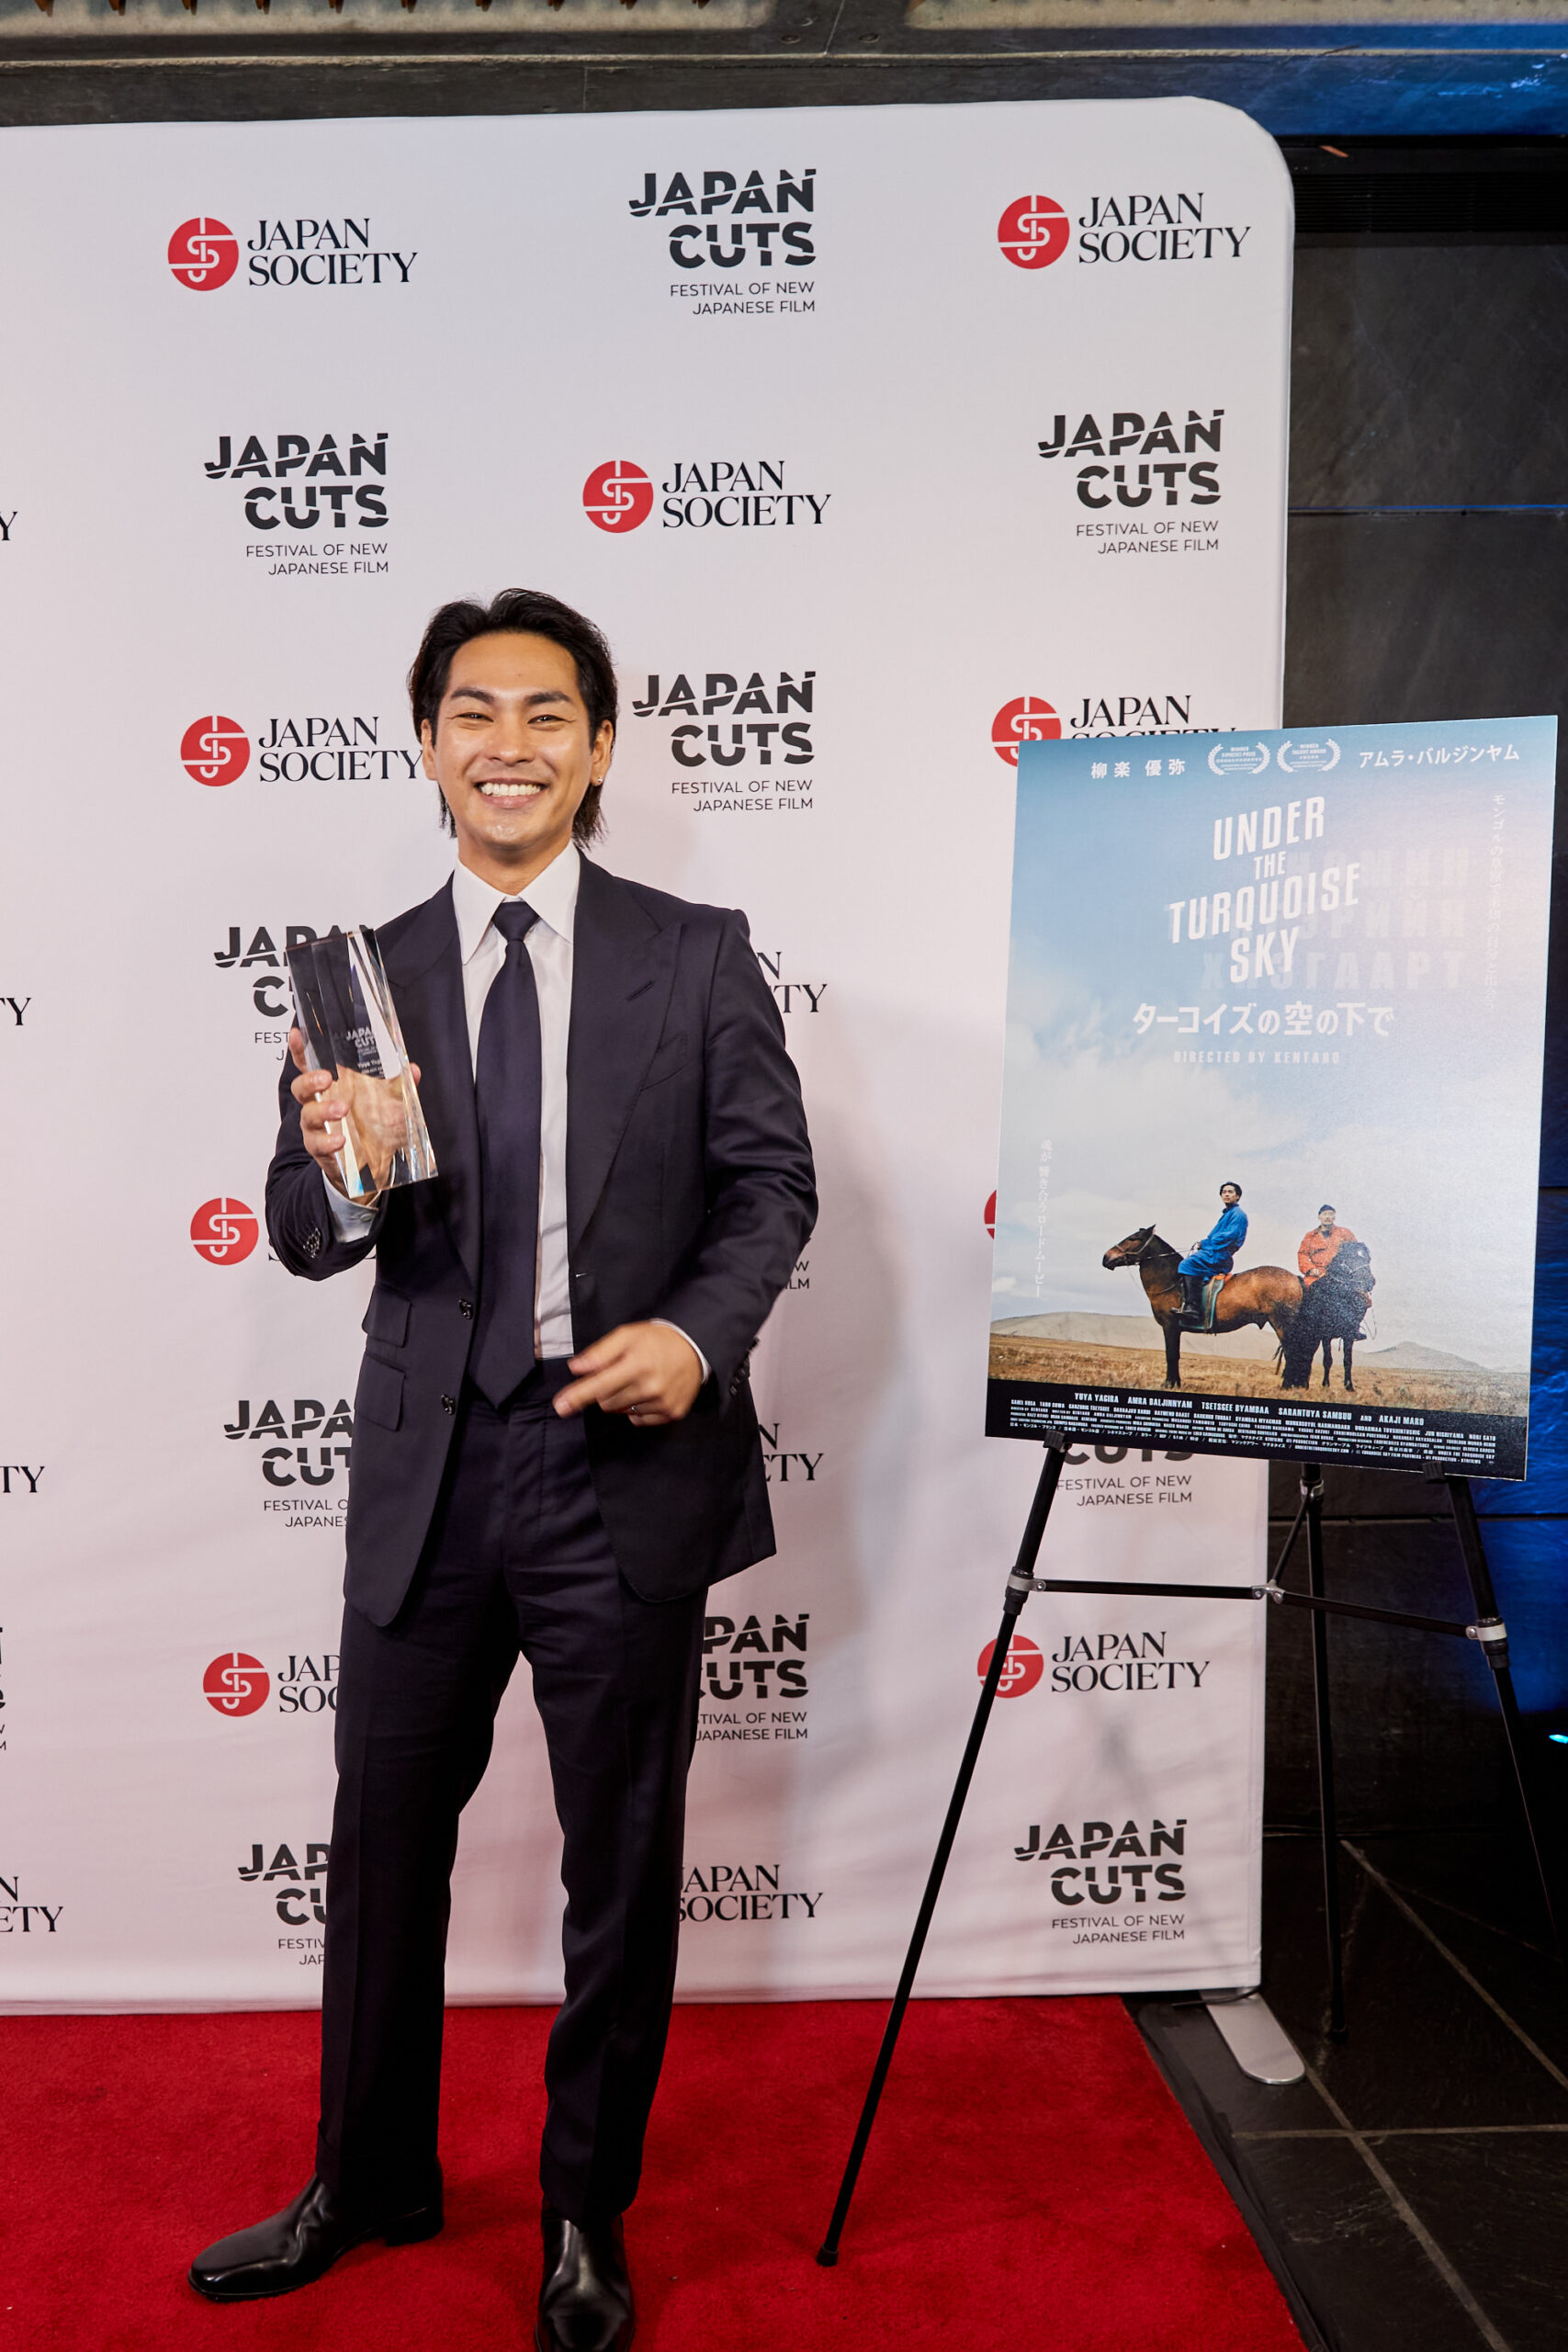 'Under the Turquoise Sky' lead actor Yuya Yagira at 2023 Japan Cuts Film Festival. Photo Credit: Japan Society